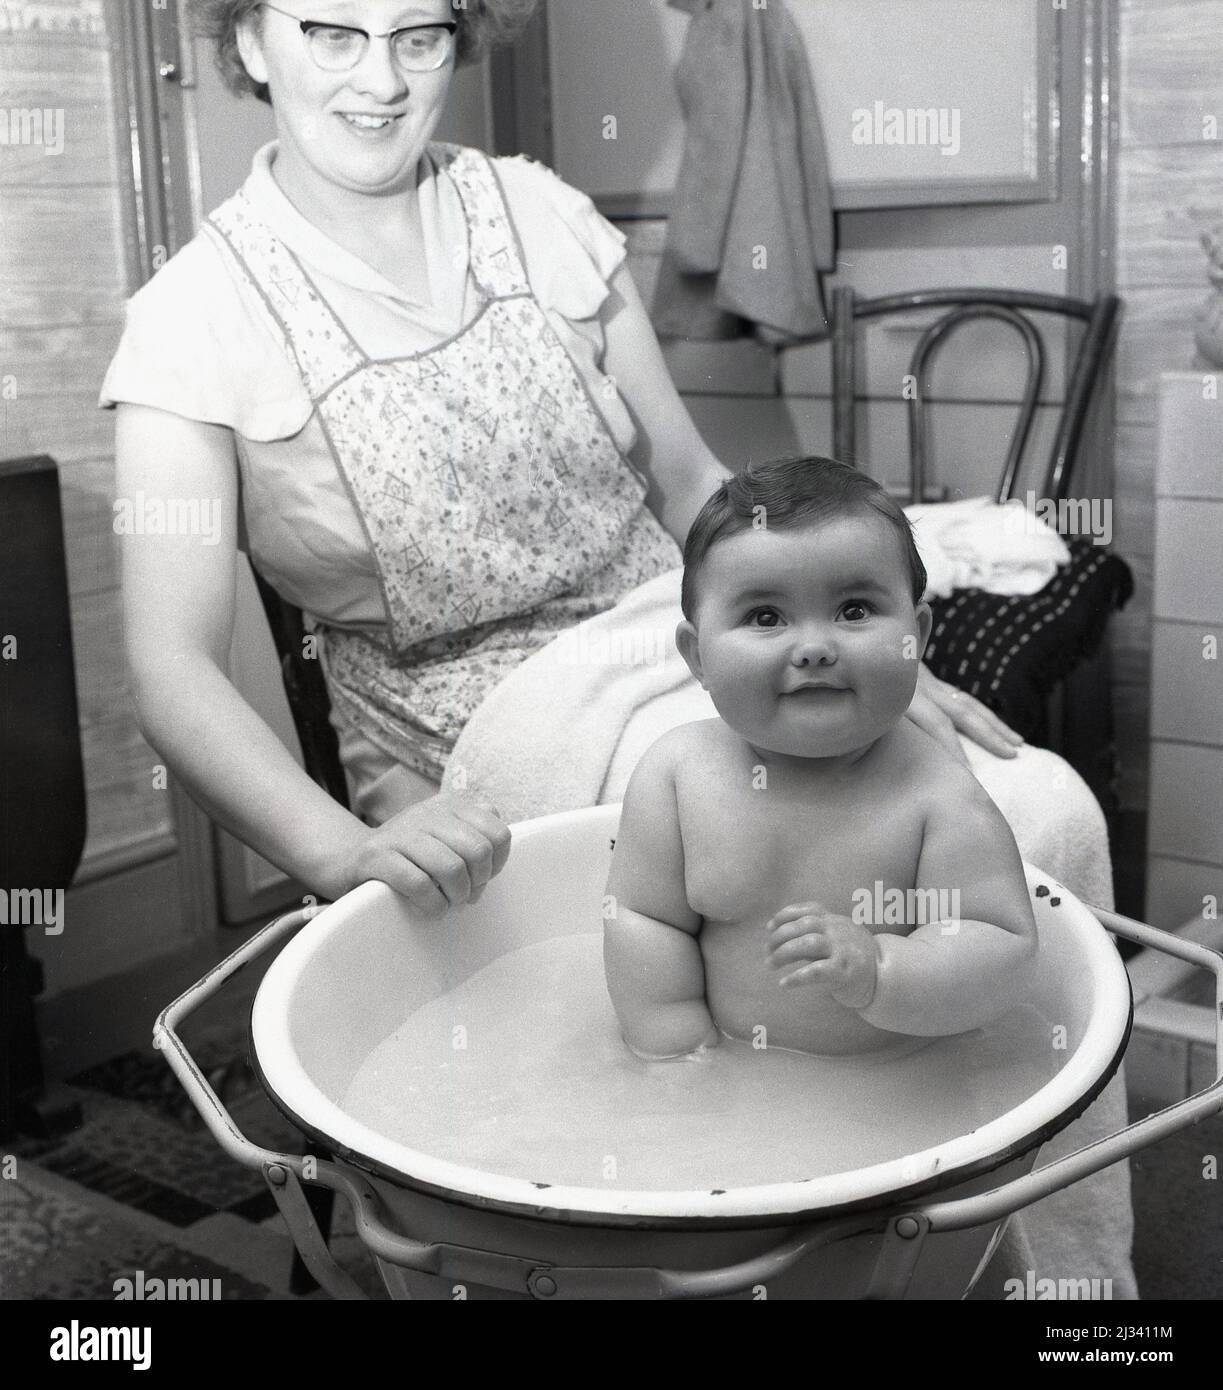 1959, historical, an infant sitting in an enamel bowl in a metal frame having a bath, with its mother sitting beside, wearing a pinafore and with a towel on her lap, Stockport, Manchester, England, UK. Stock Photo